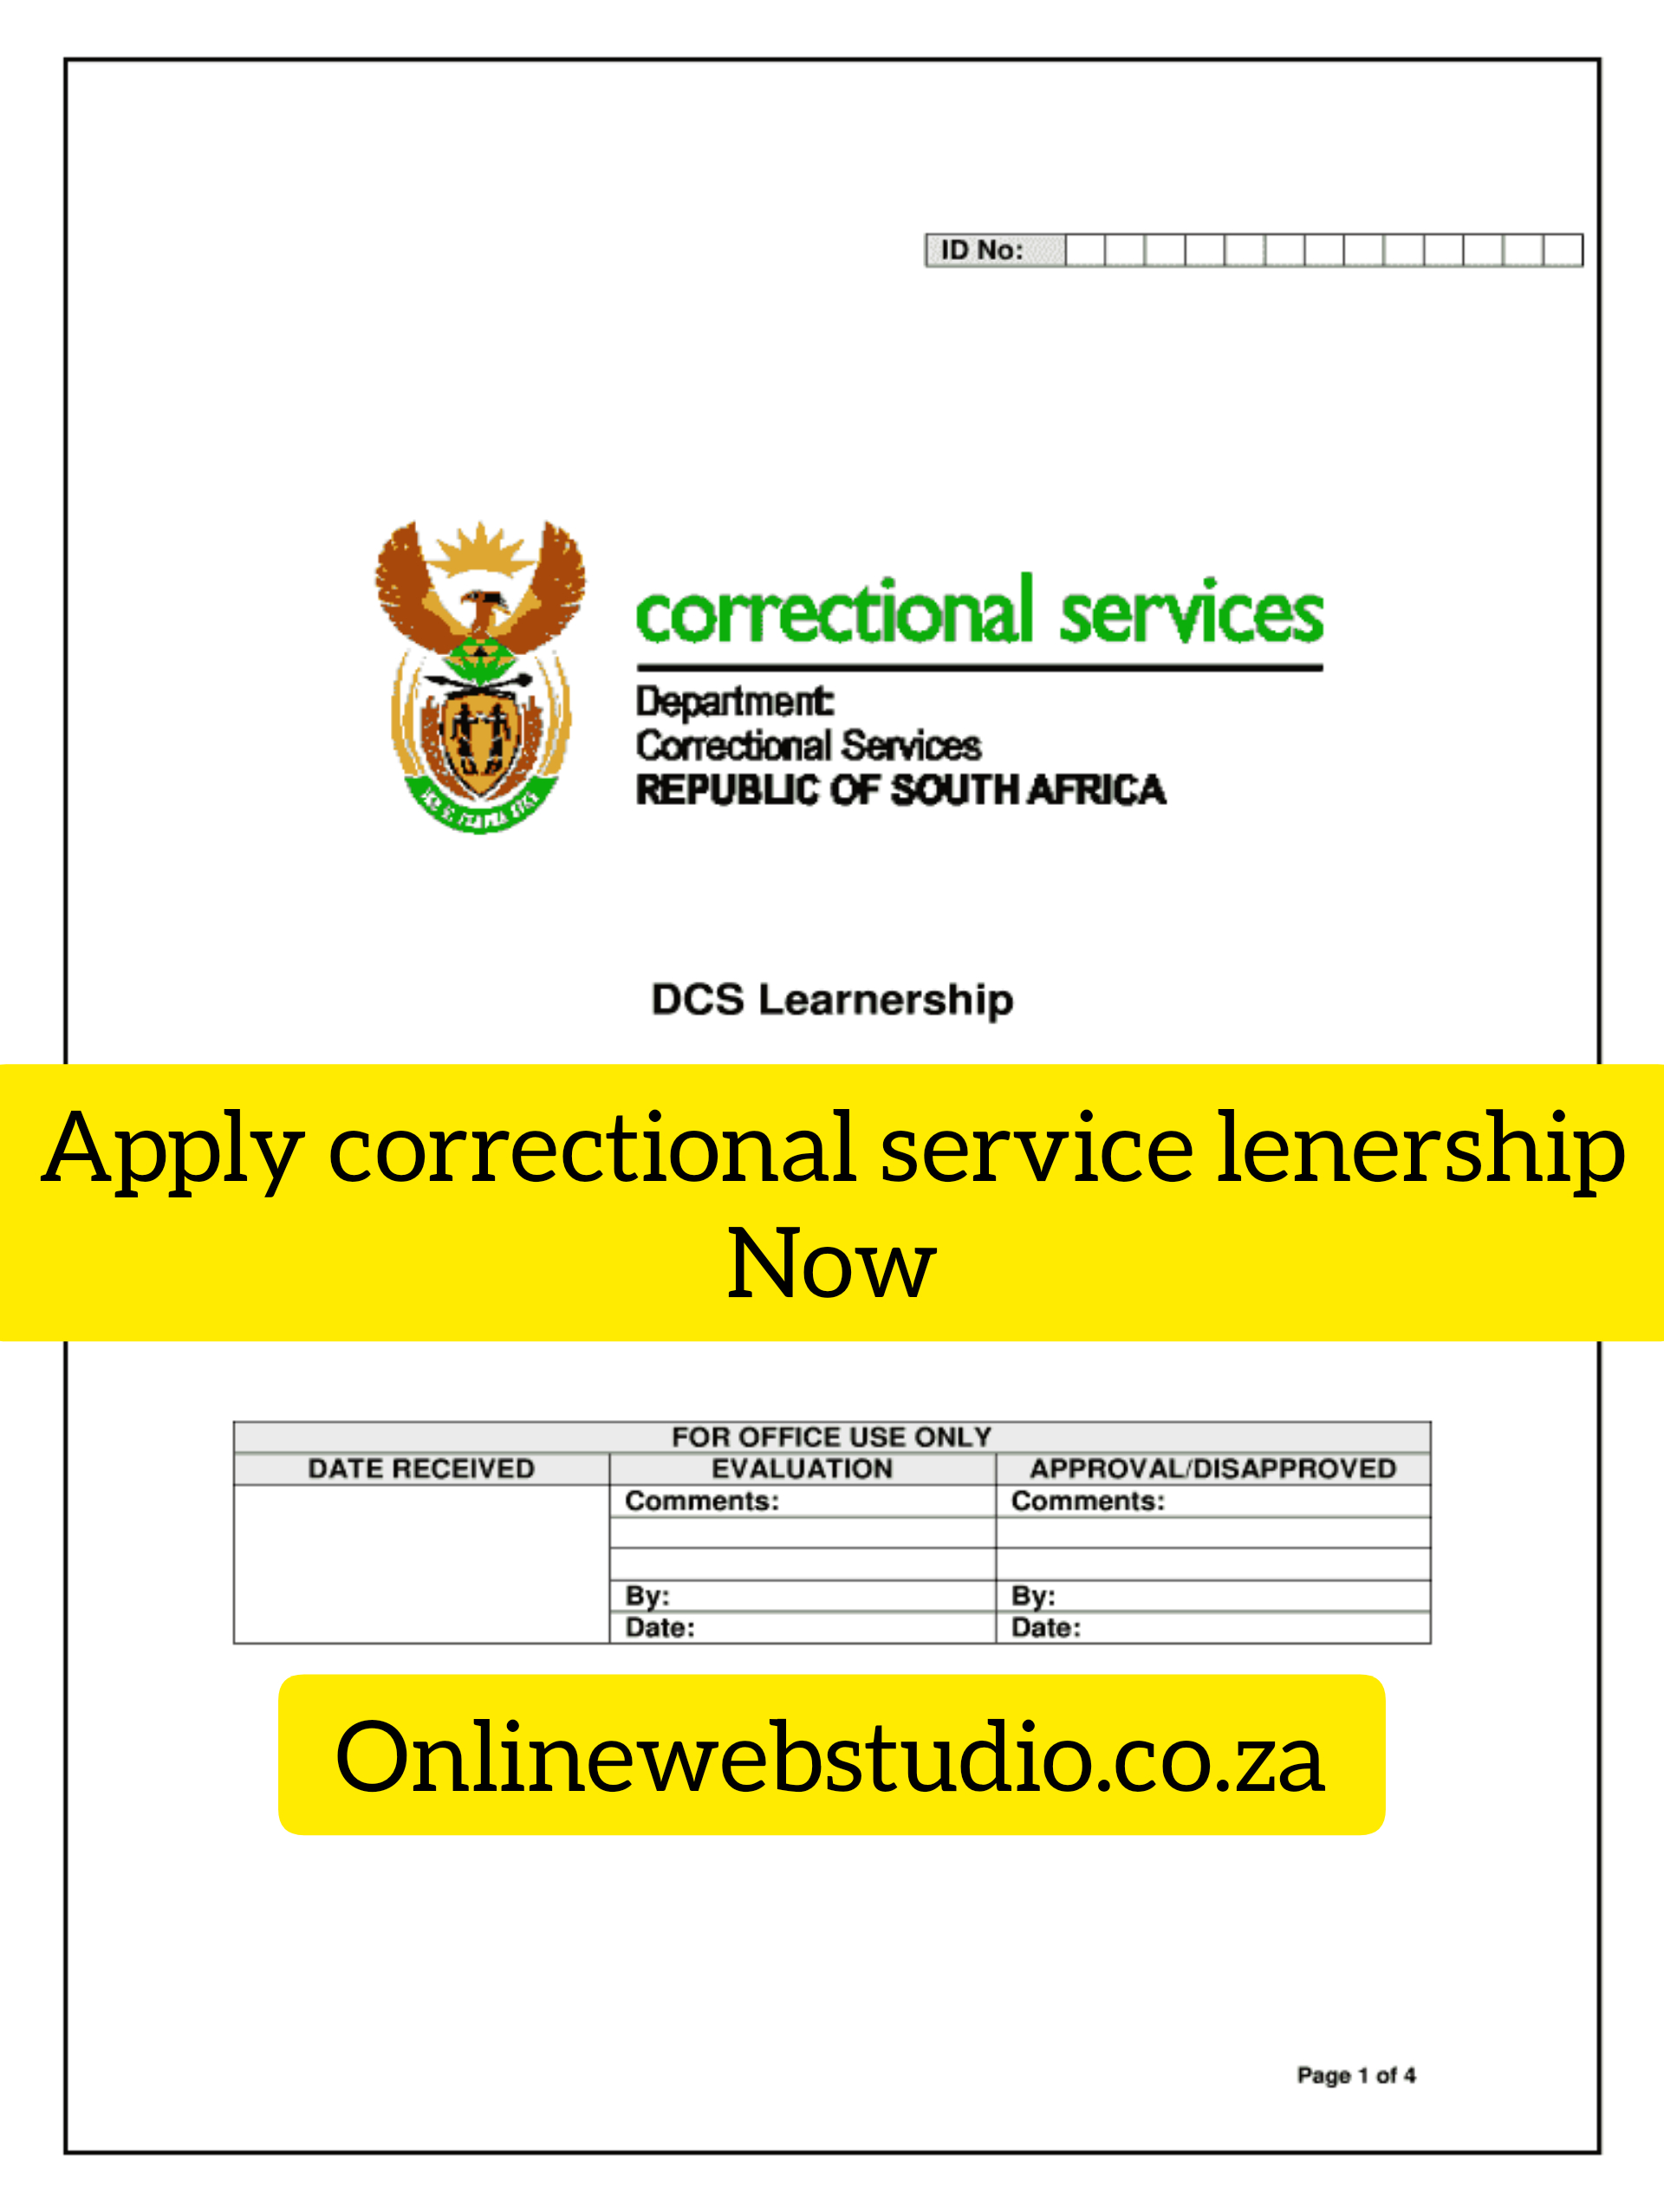 CORRECTIONAL SERVICE LEARNERSHIP APPLICATION FORMS